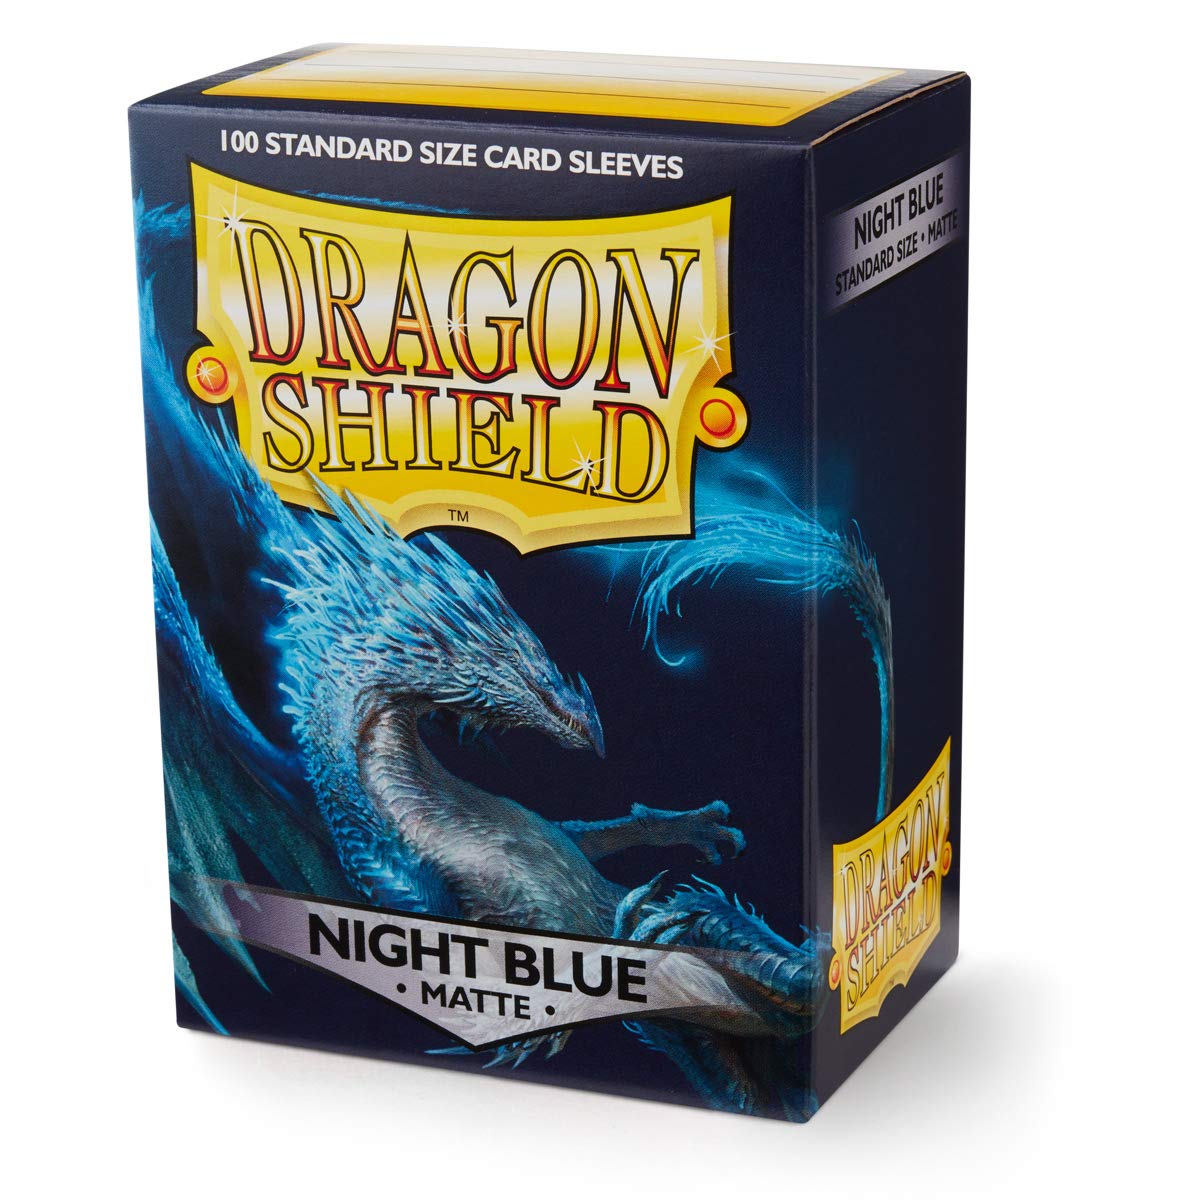 Dragon Shield Standard Size Sleeves – Matte Night Blue 100CT - Card Sleeves are Smooth & Tough - Compatible with Pokemon, Yu-Gi-Oh!, & Magic The Gathering Card Sleeves – MTG, TCG, OCG